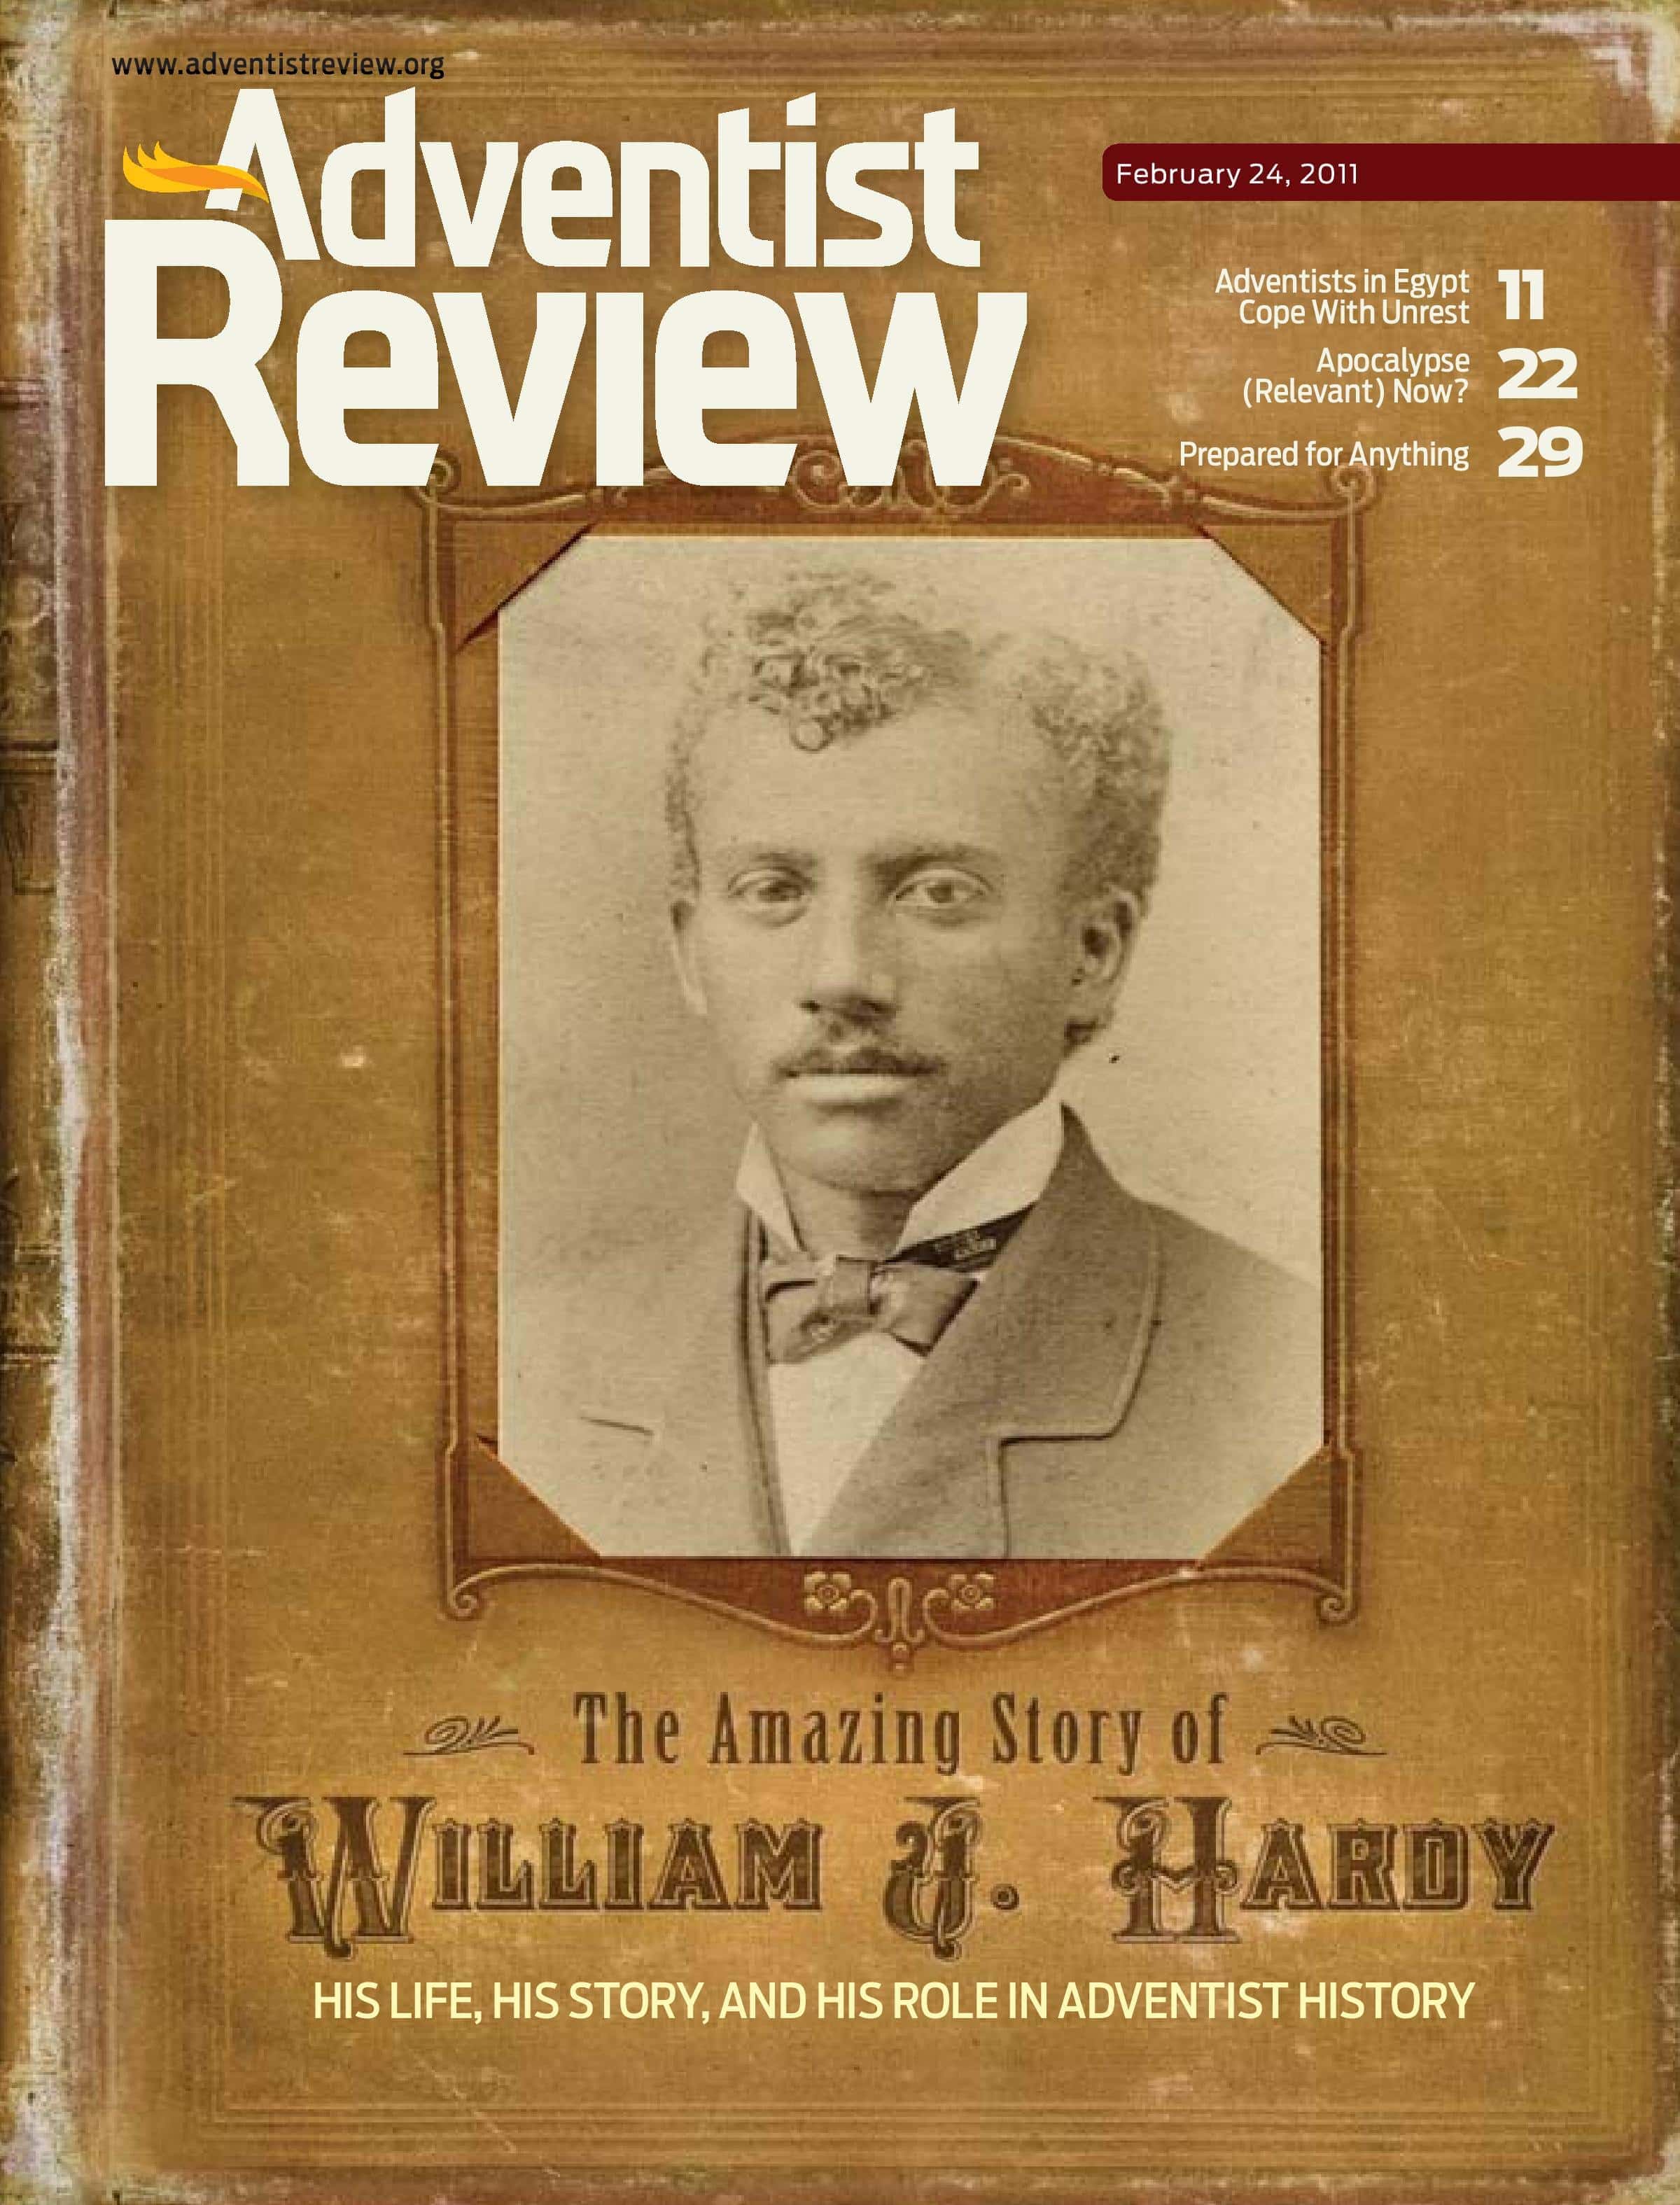 The Adventist Review published a profile of William J. Hardy in 2011.